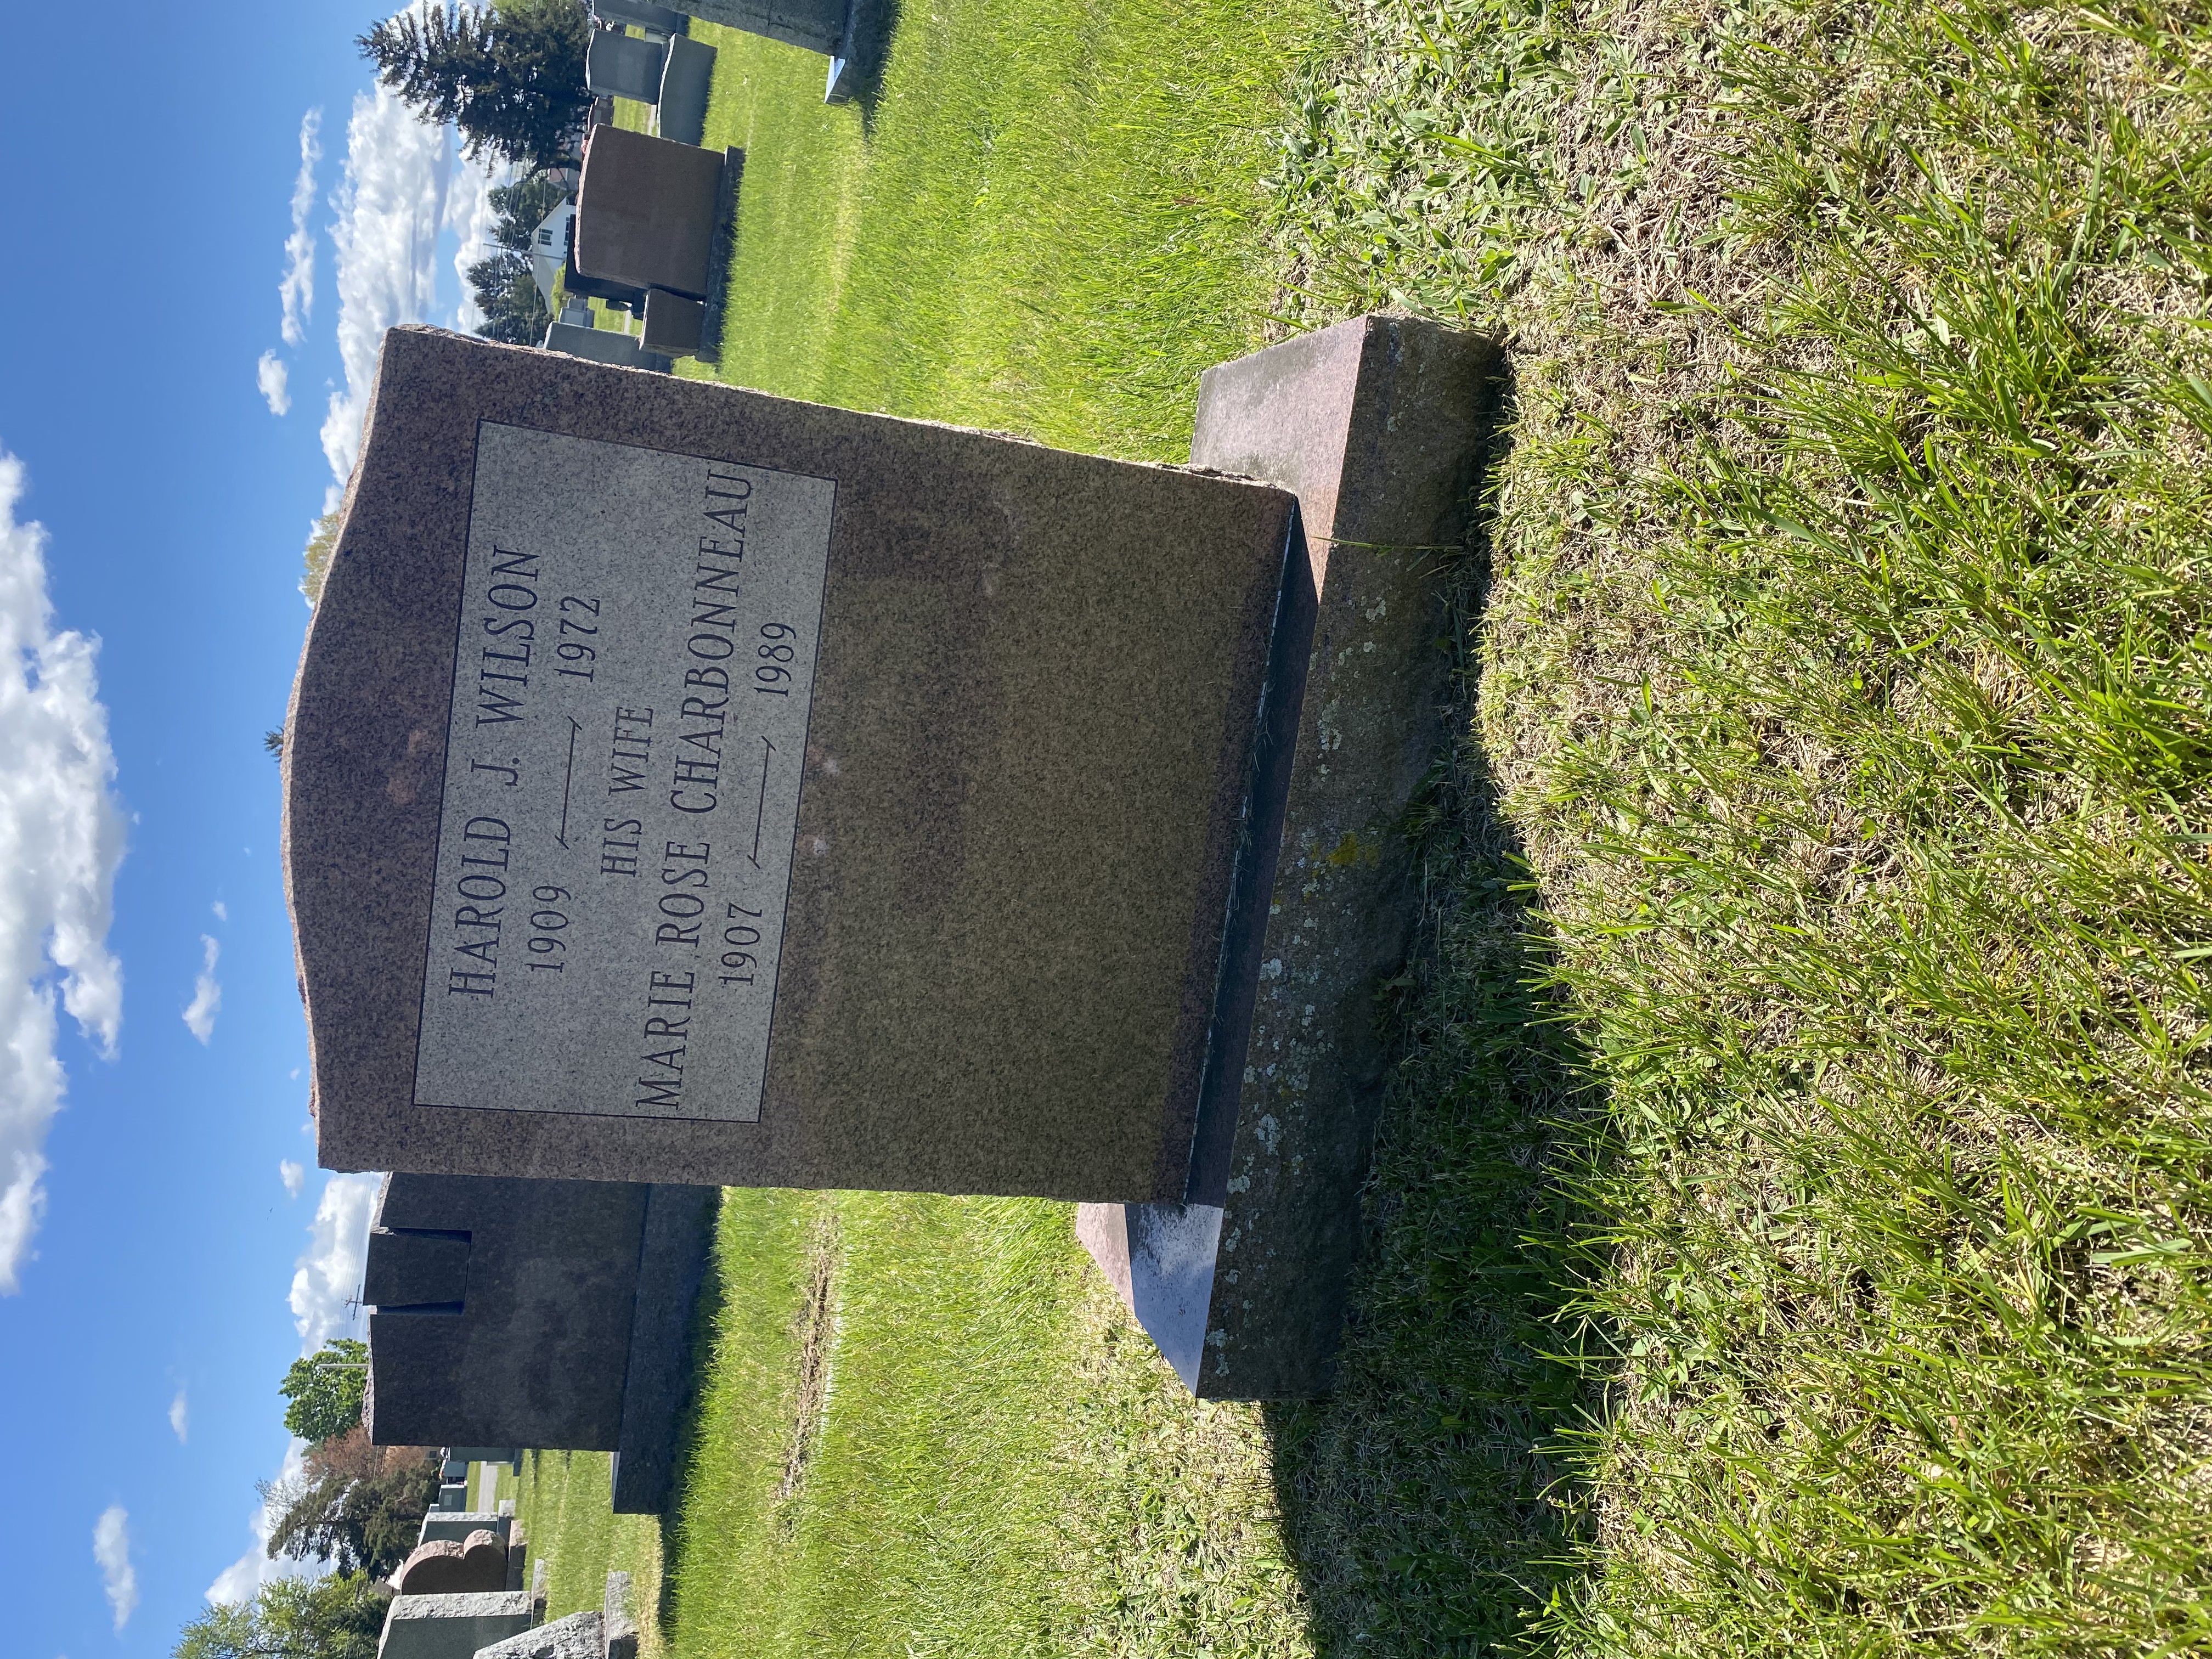 Marie Rose's Grave, inscribed Harold J Wilson, 1909 to 1972, his wife, Marie Rose Charbonneau, 1907-1989